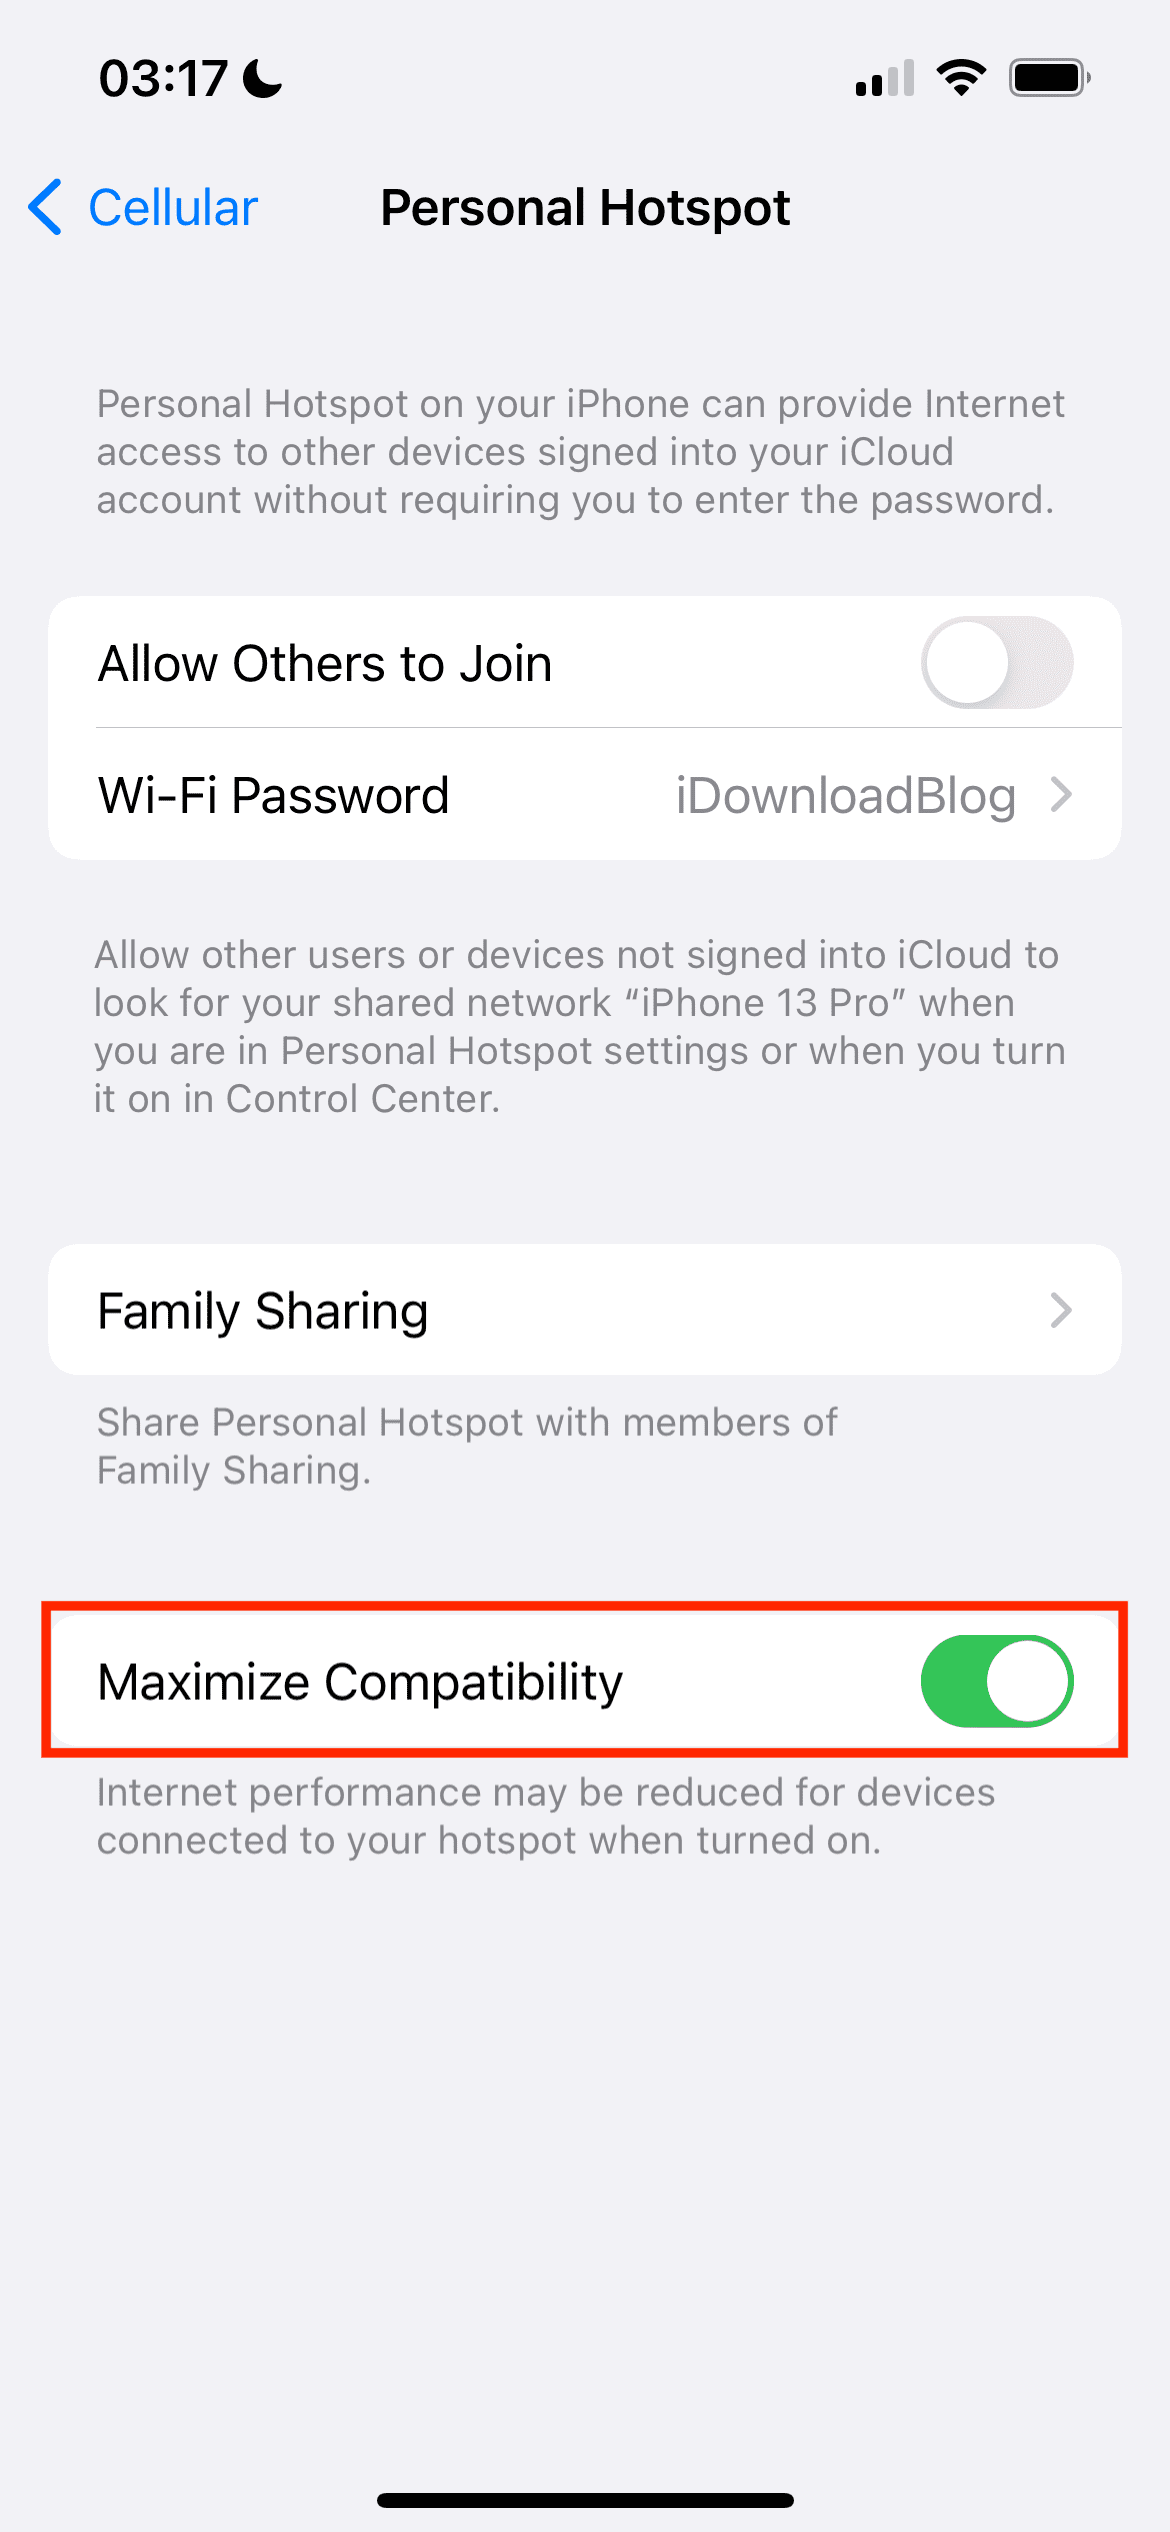 Maximize Compatibility in Personal Hotspot settings on iPhone